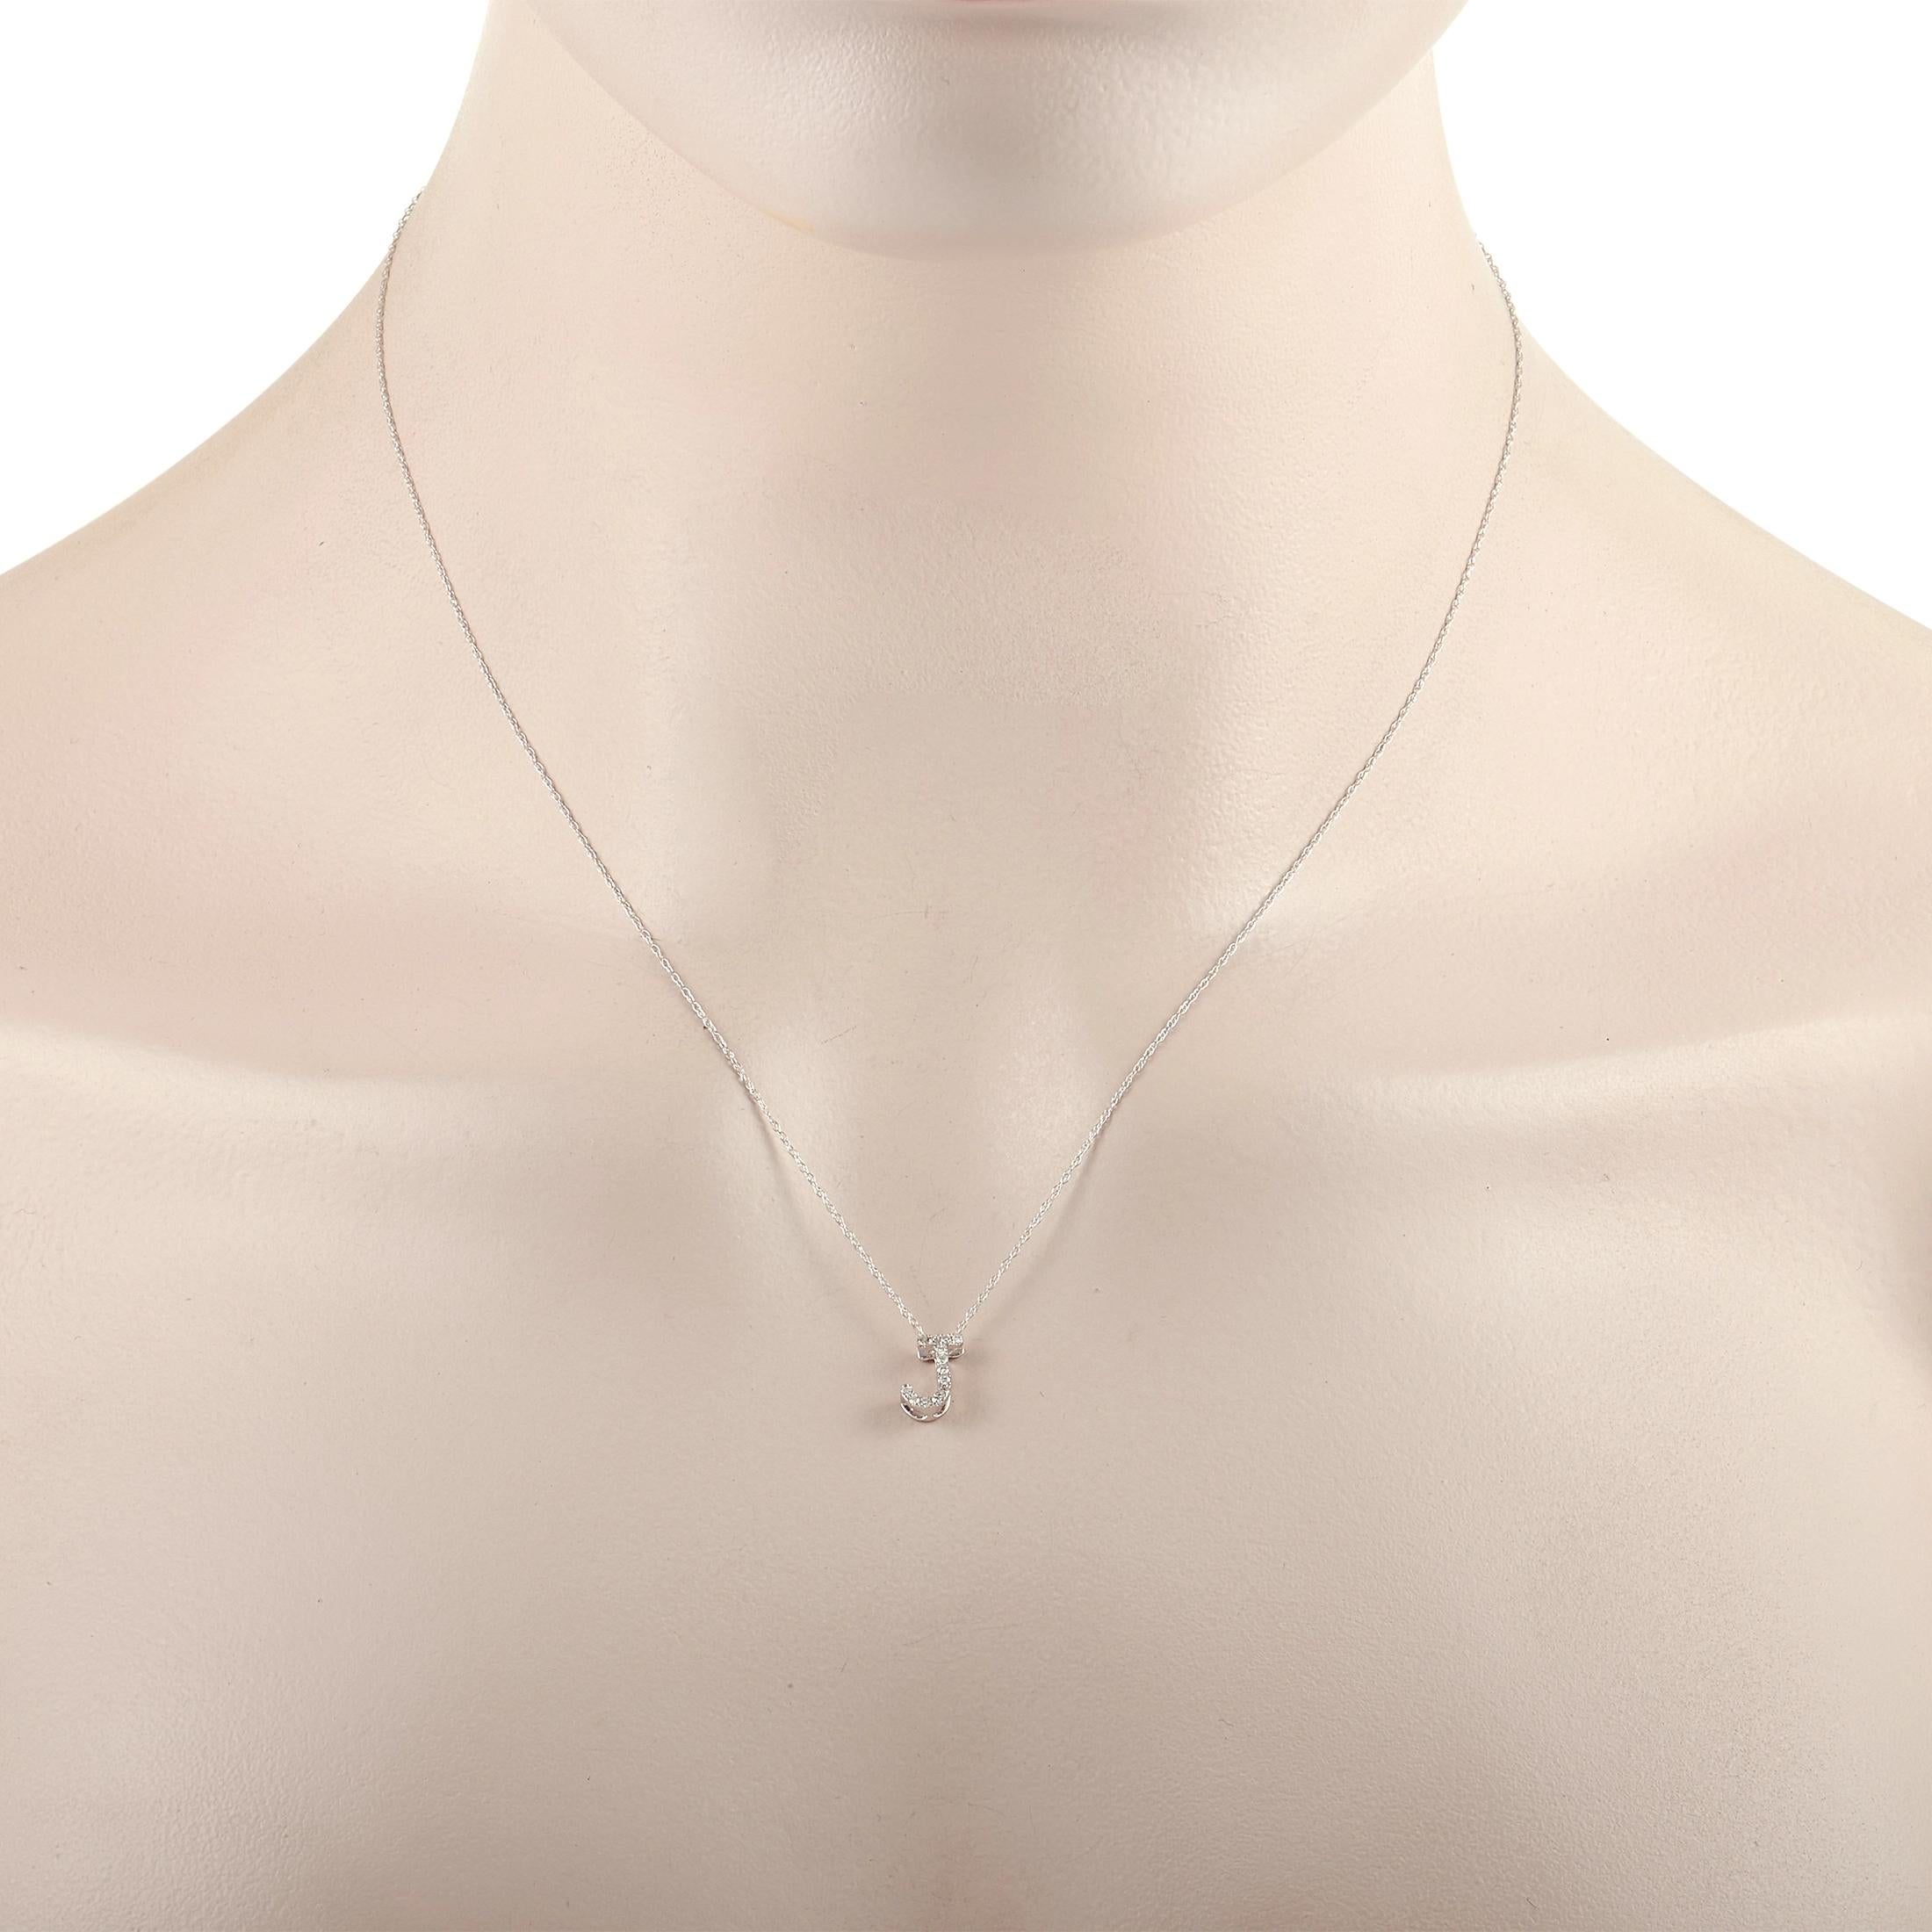 This pretty LB Exclusive 14K White Gold 0.10 ct Diamond Initial ‘J’ Necklace is made with a delicate 14K white gold chain and features a small white gold pendant shaped like the letter ‘J’ and set with 0.10 carats of round diamonds throughout. The